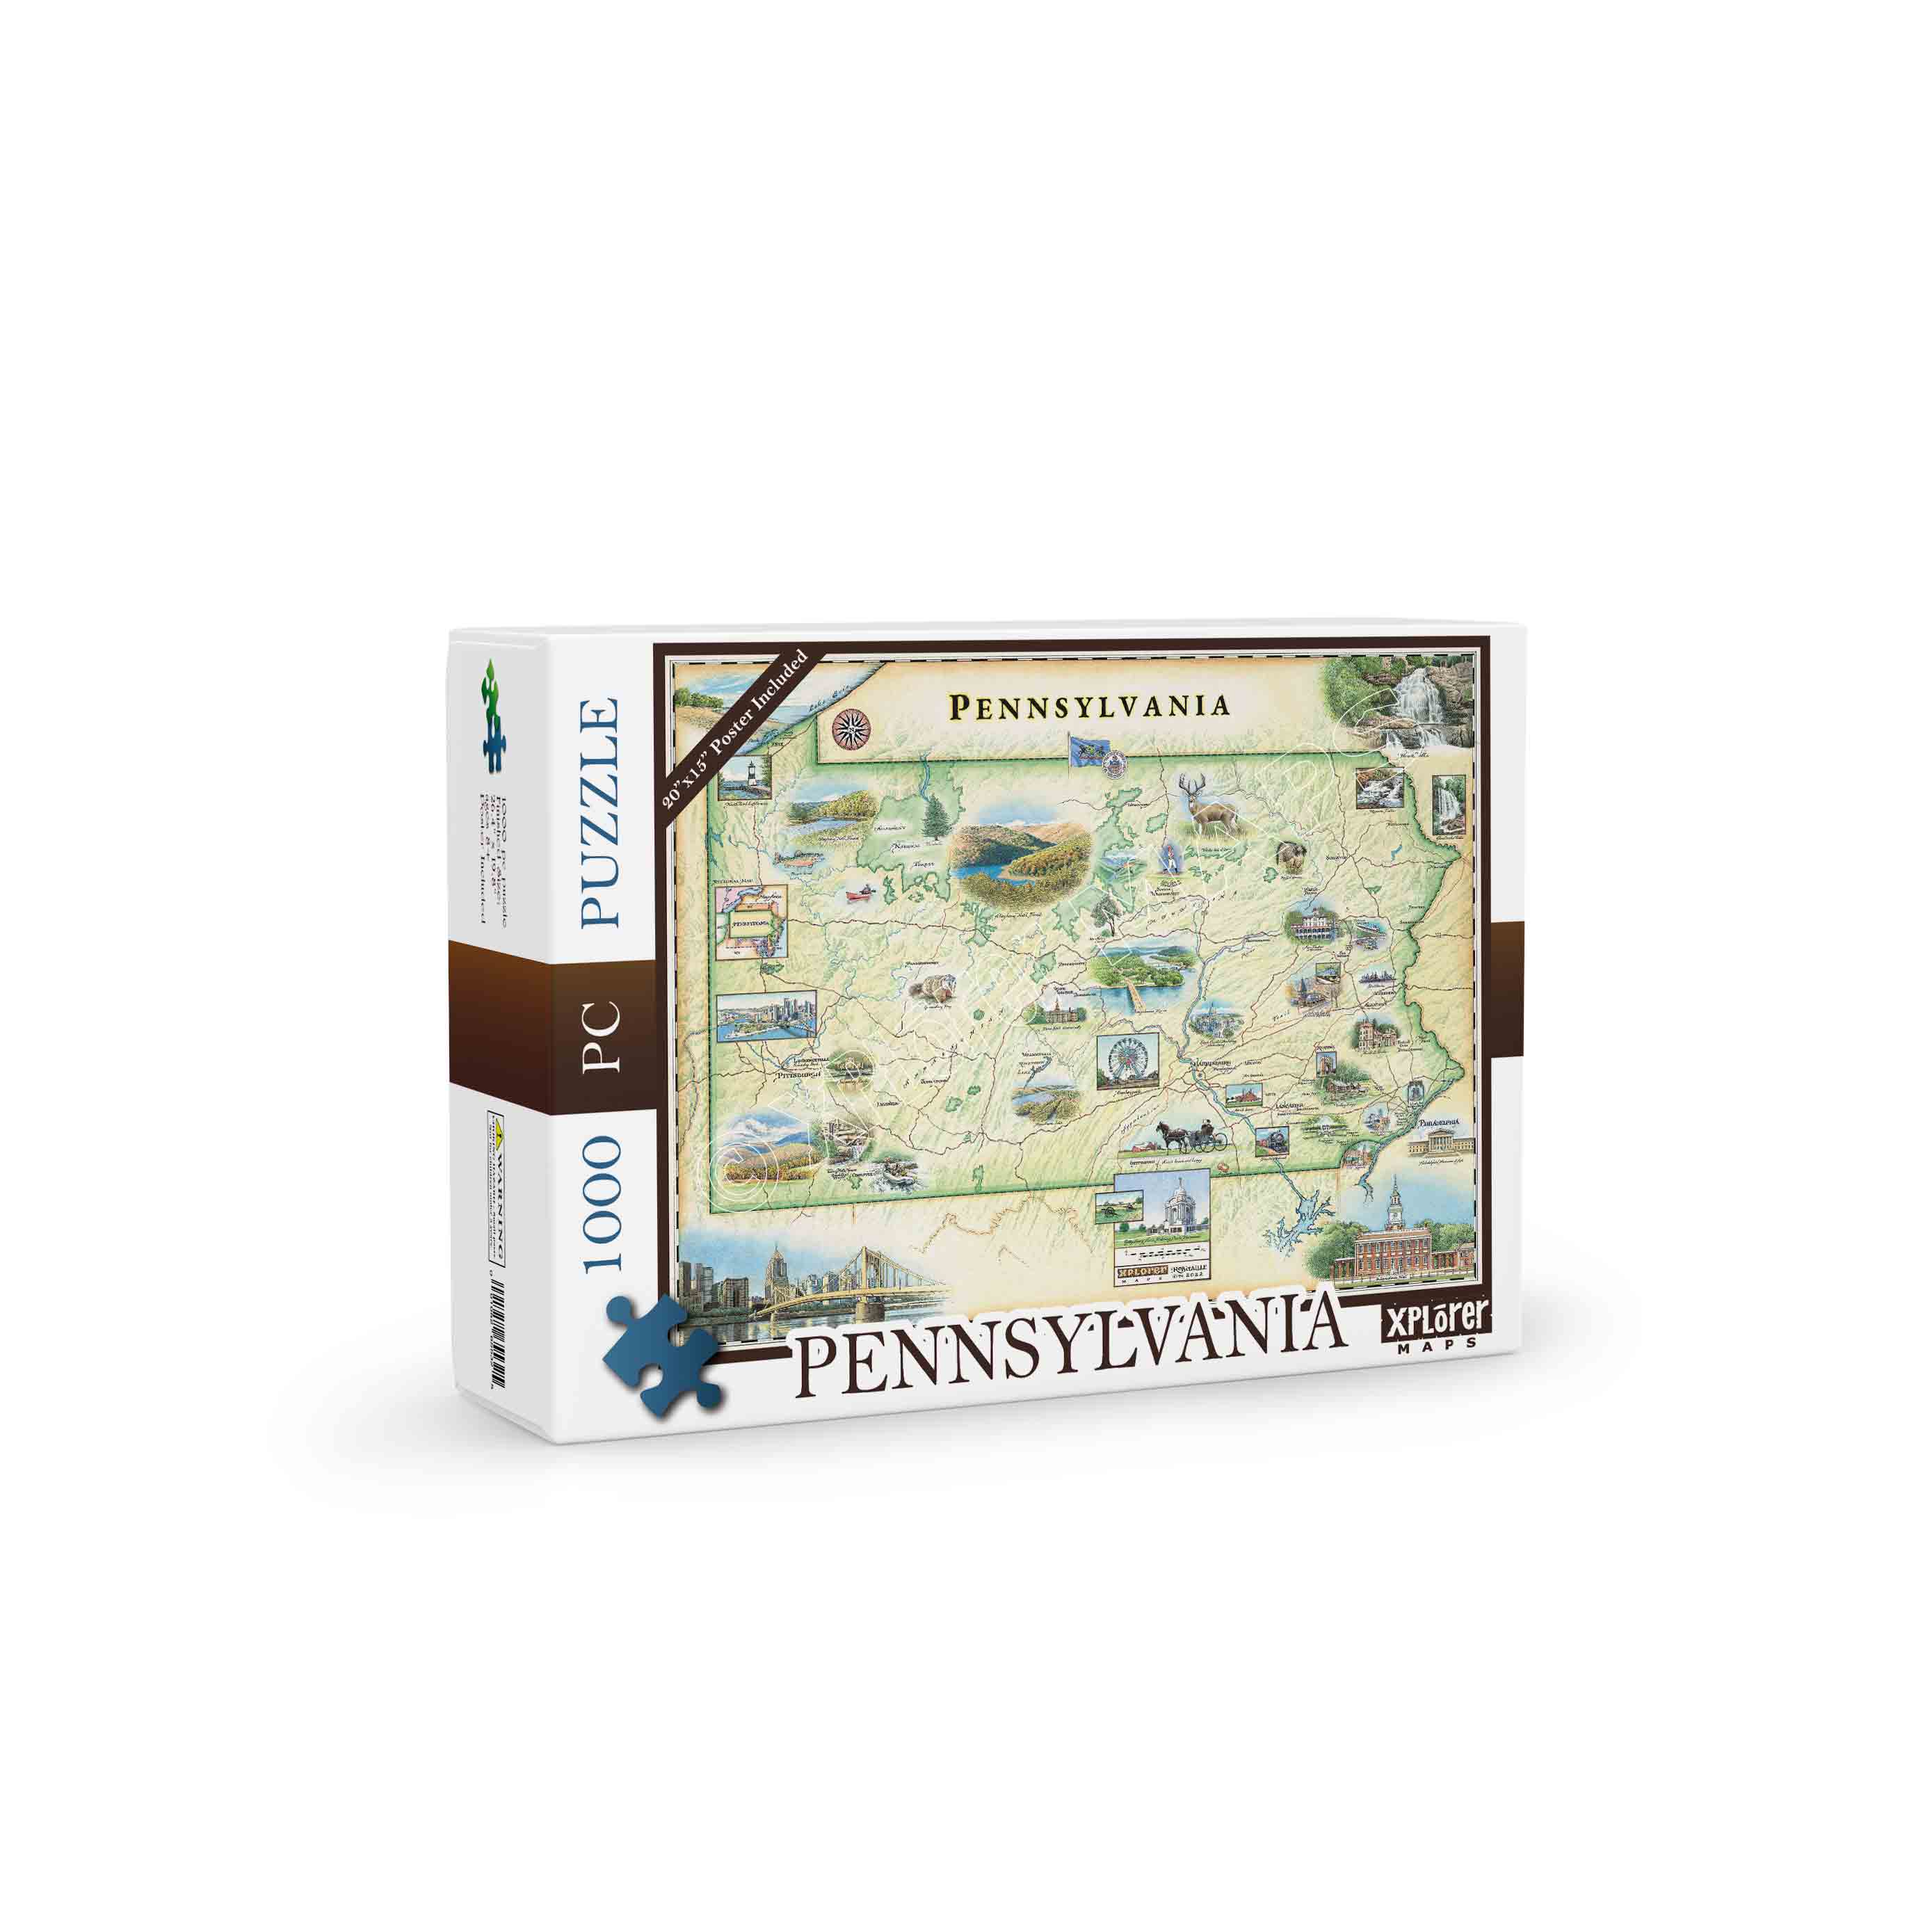 Pennsylvania State Jigsaw Puzzle by Xplorer Maps. Features illustrations of places like Hershey Park, Valley Forge, Philadelphia, and the Allegheny National Forest. Flora and fauna include Punxsutawney Phil and mountain laurel.